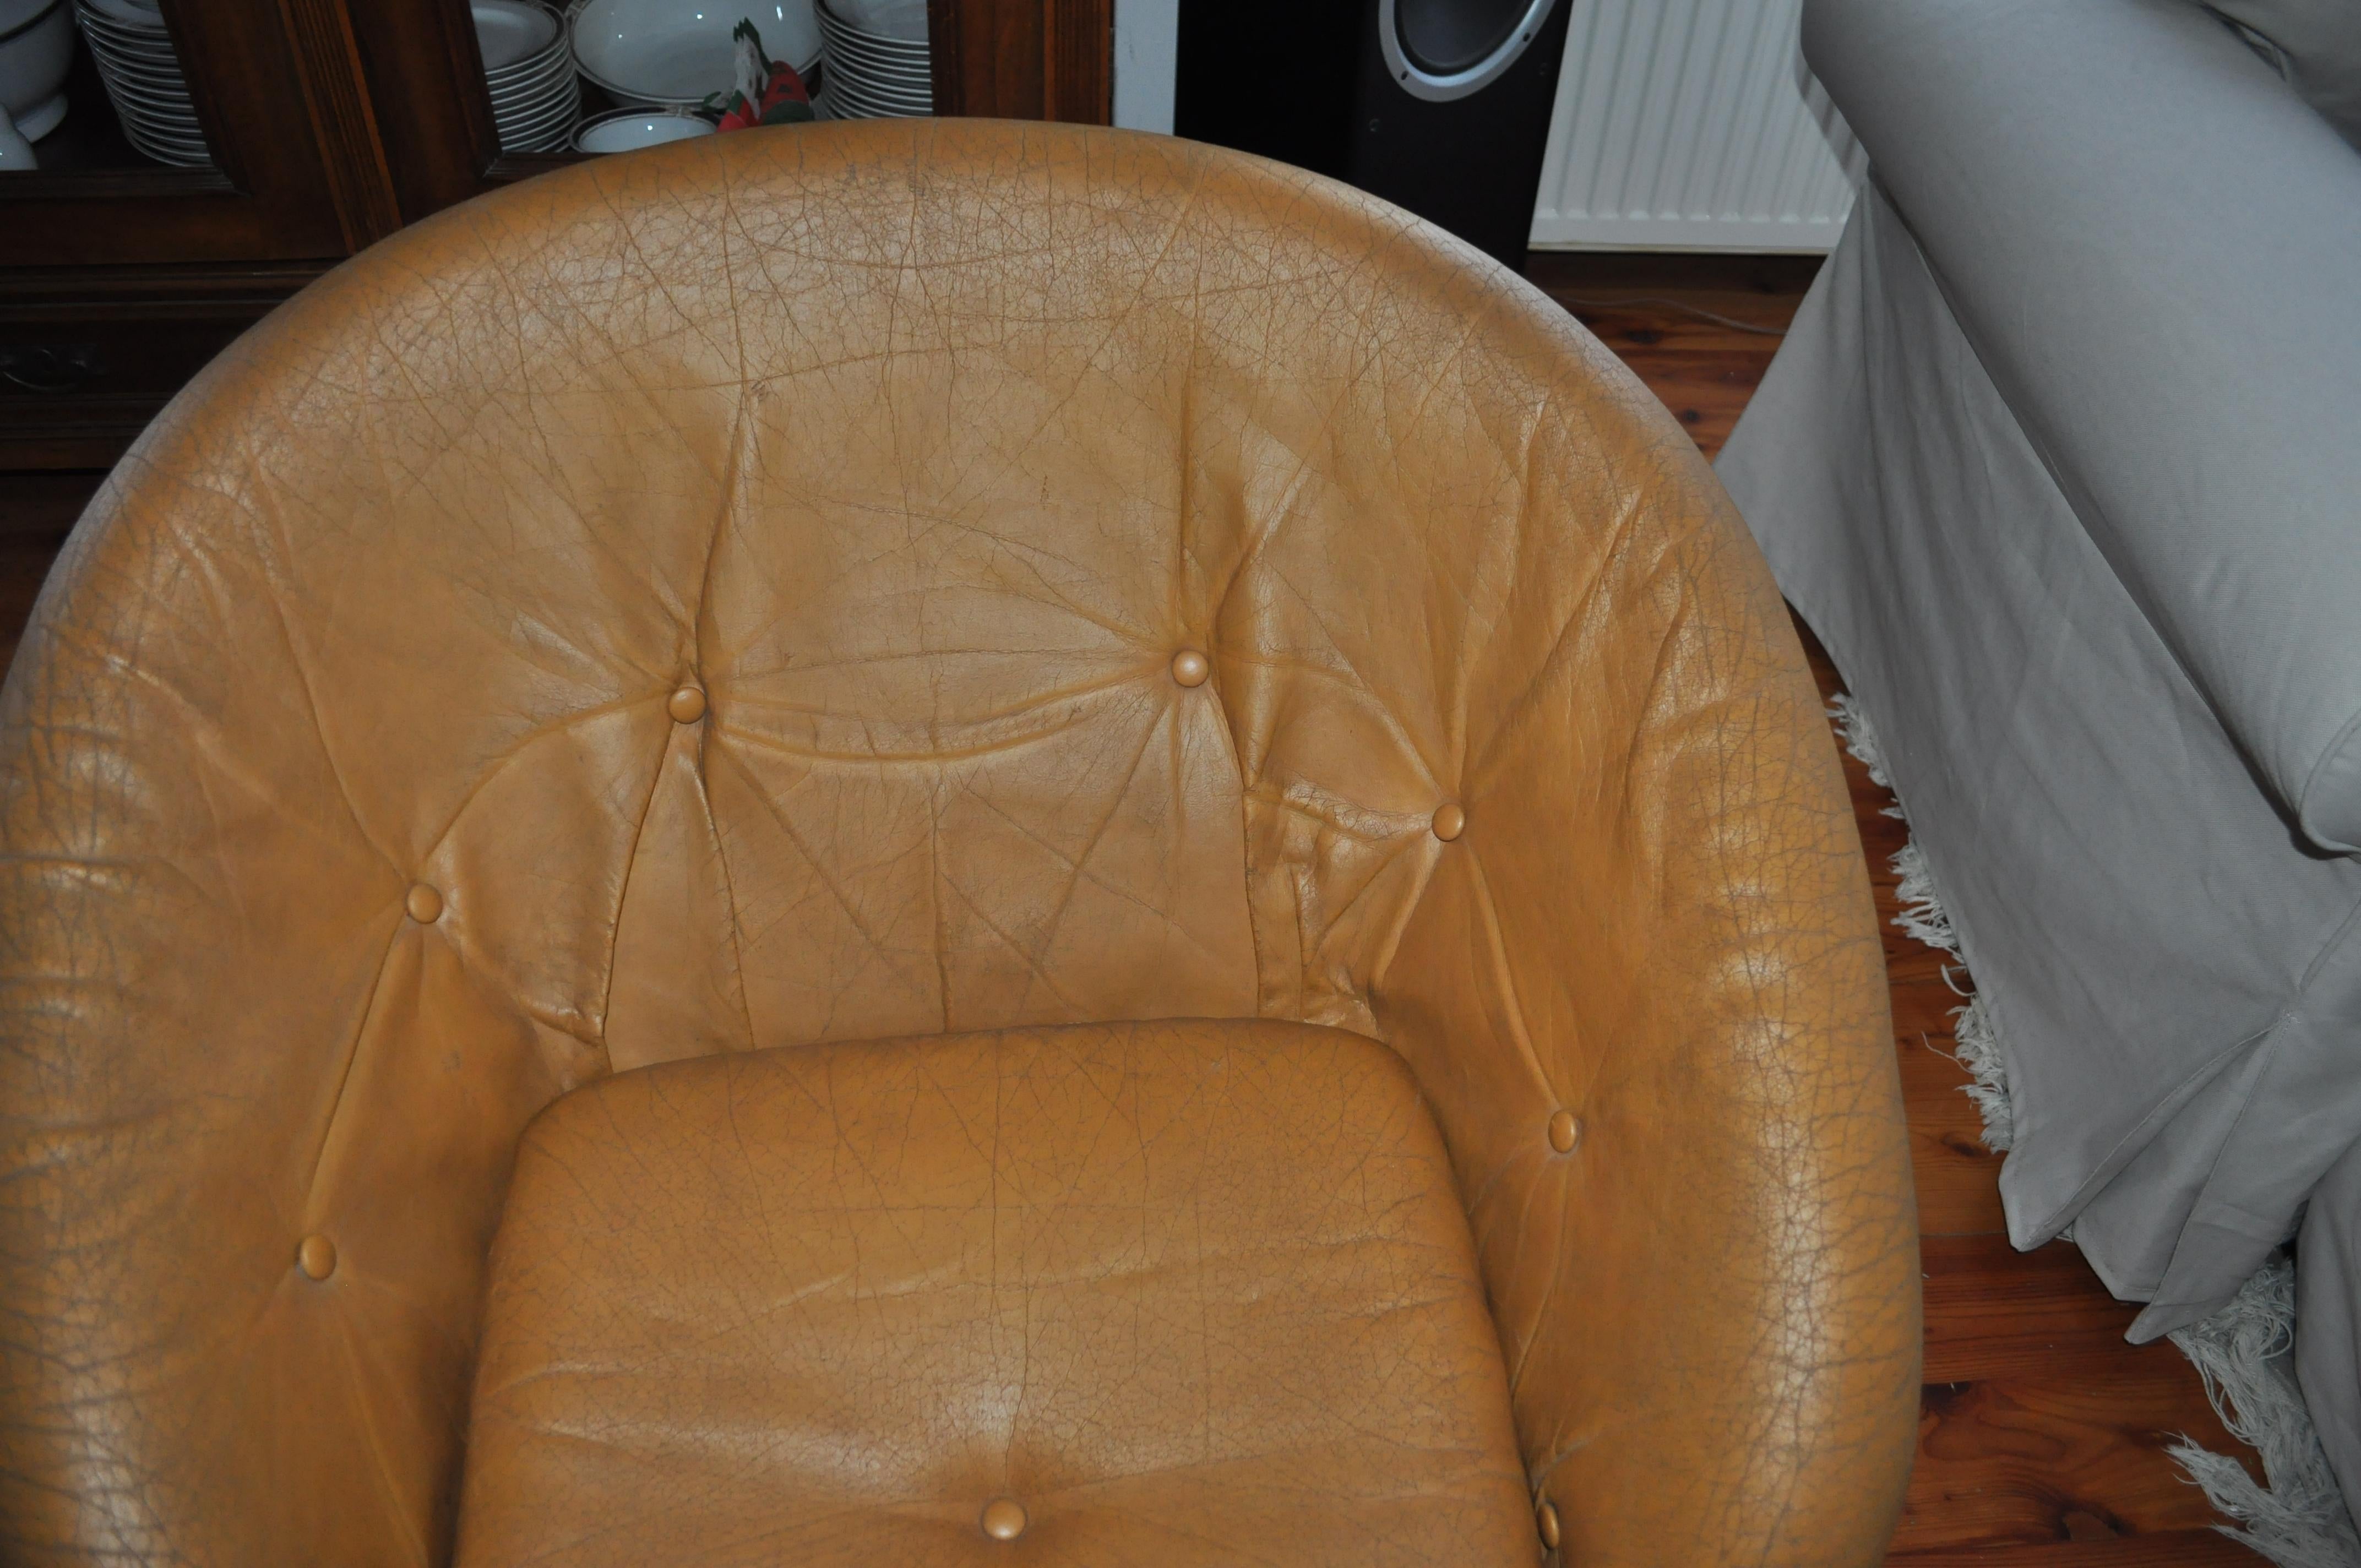 This ivory plastic club chair was designed by Raphael Raffel (Rafael), France, 1970s
Ivory fiberglass resin club chairs designed by Raphael Raffel (known as Raphaël), France, 1970s in tulip style. Original brown leatherette upholstery. Seat and